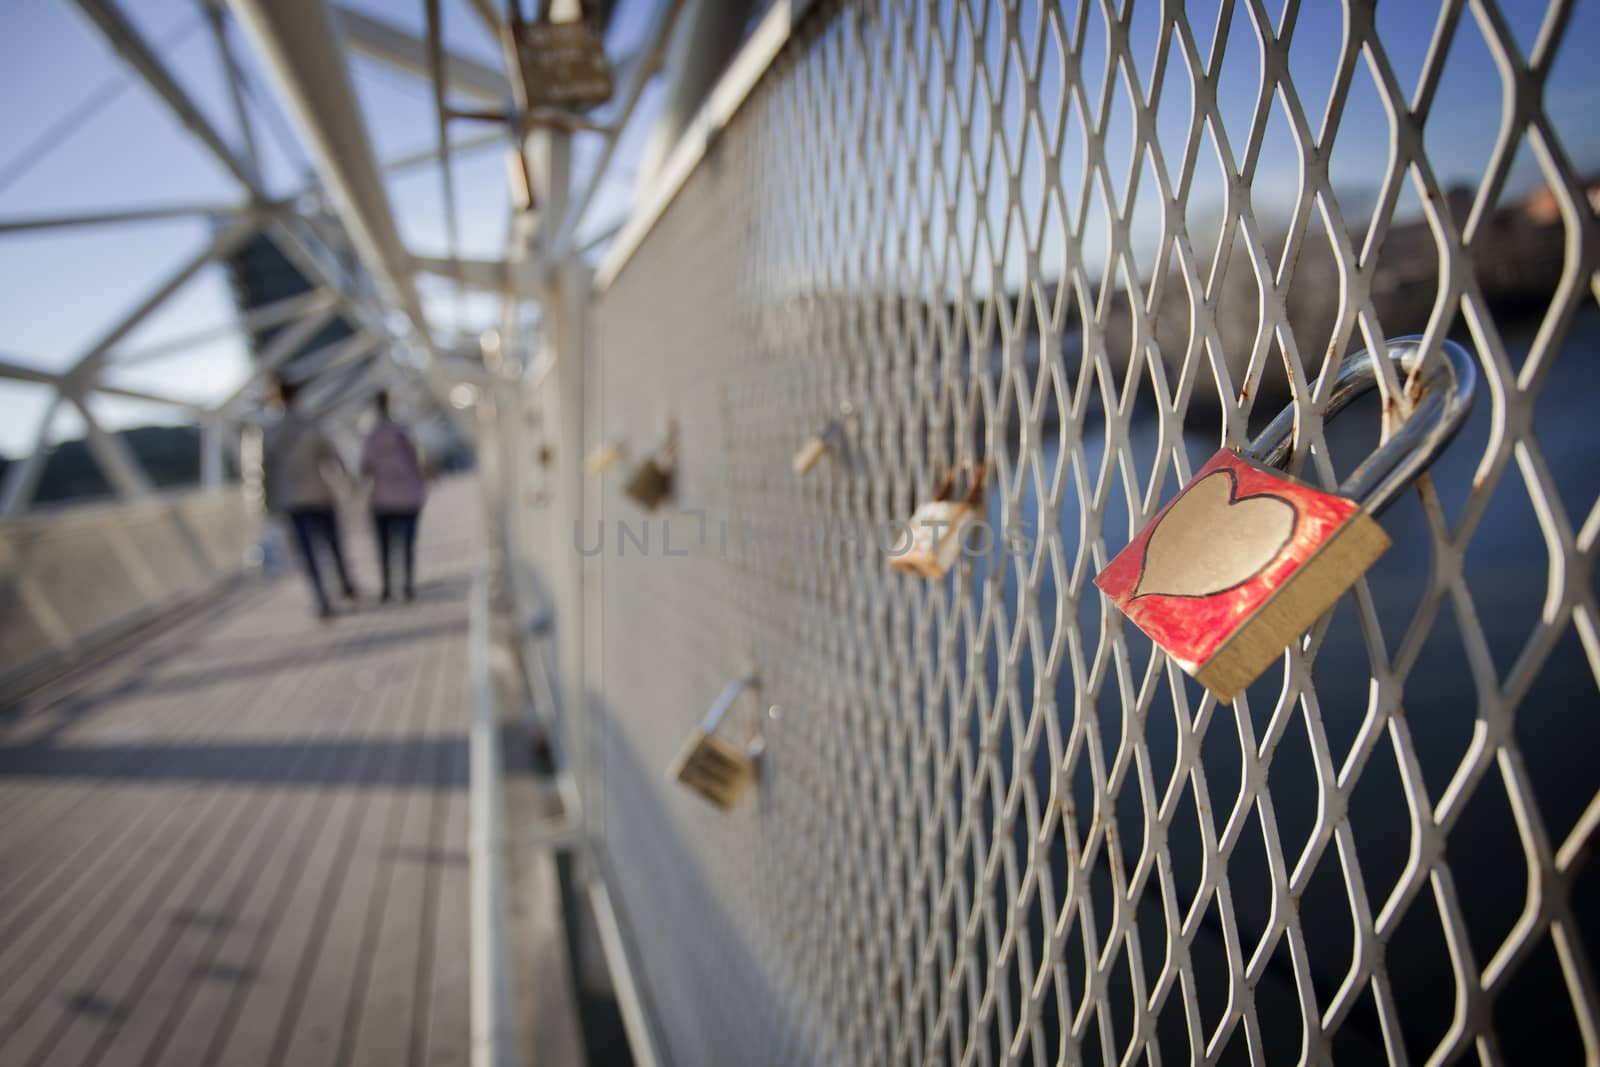 A loving couple sealed their love with a padlock